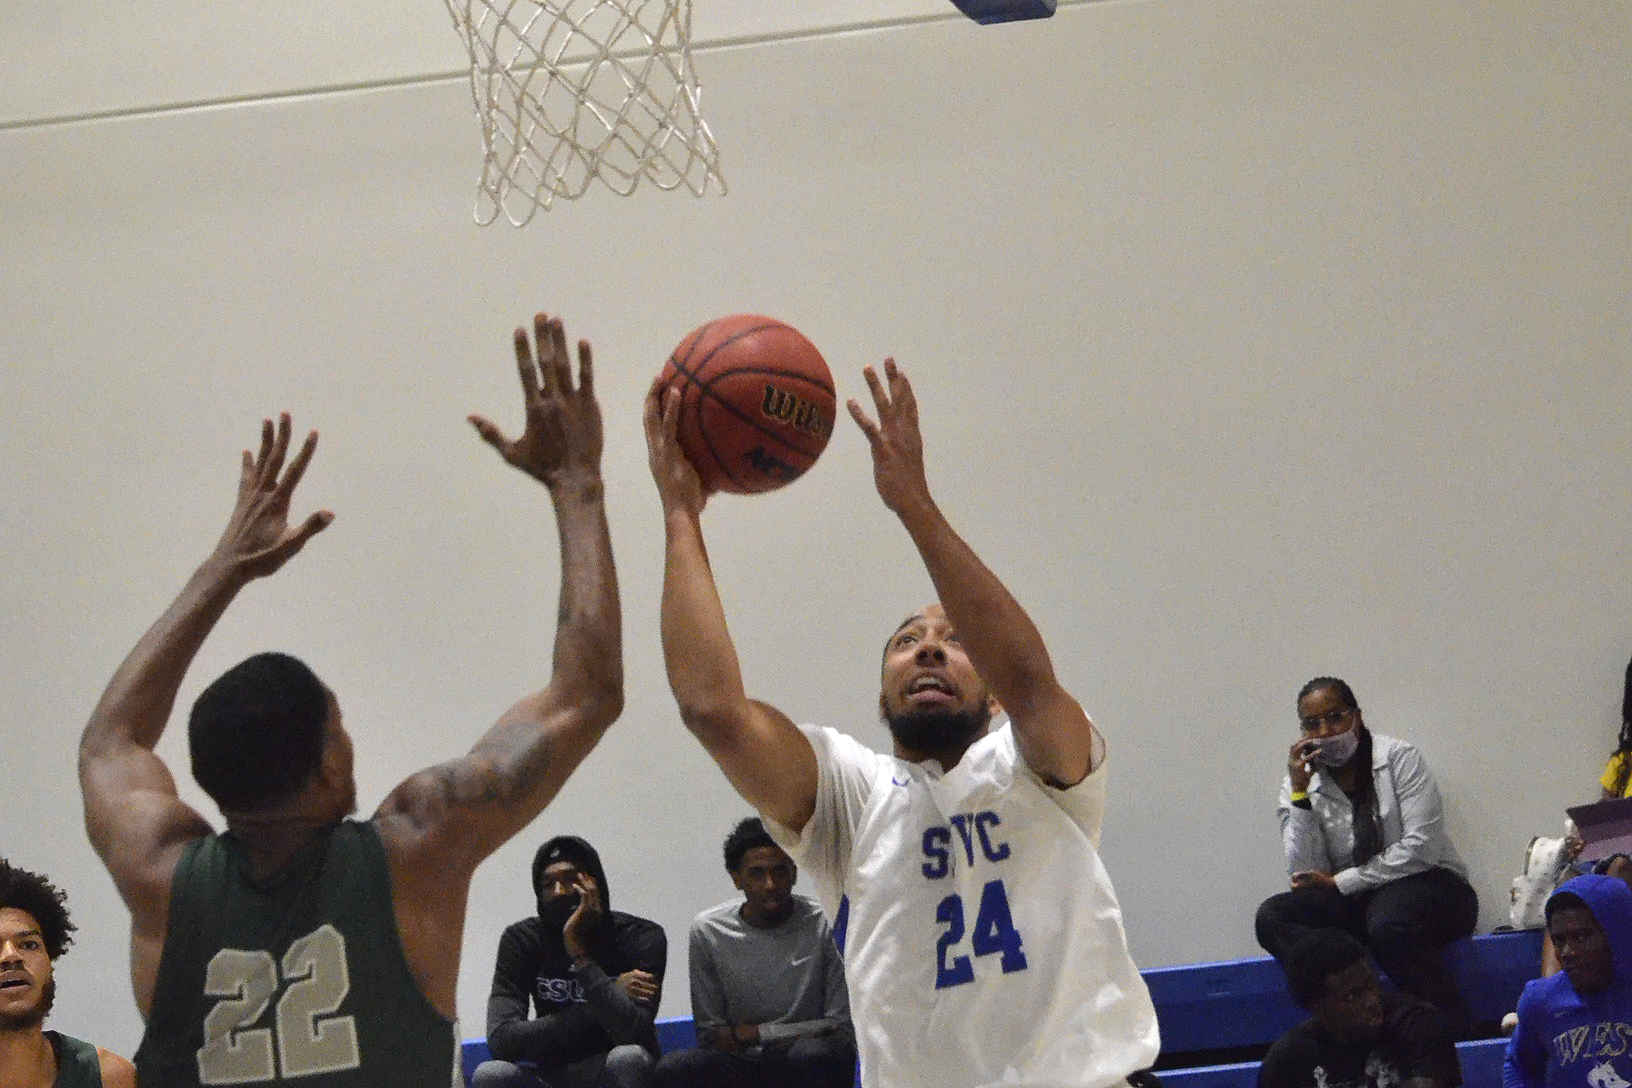 SBVC Holds Off ELAC in Close Battle